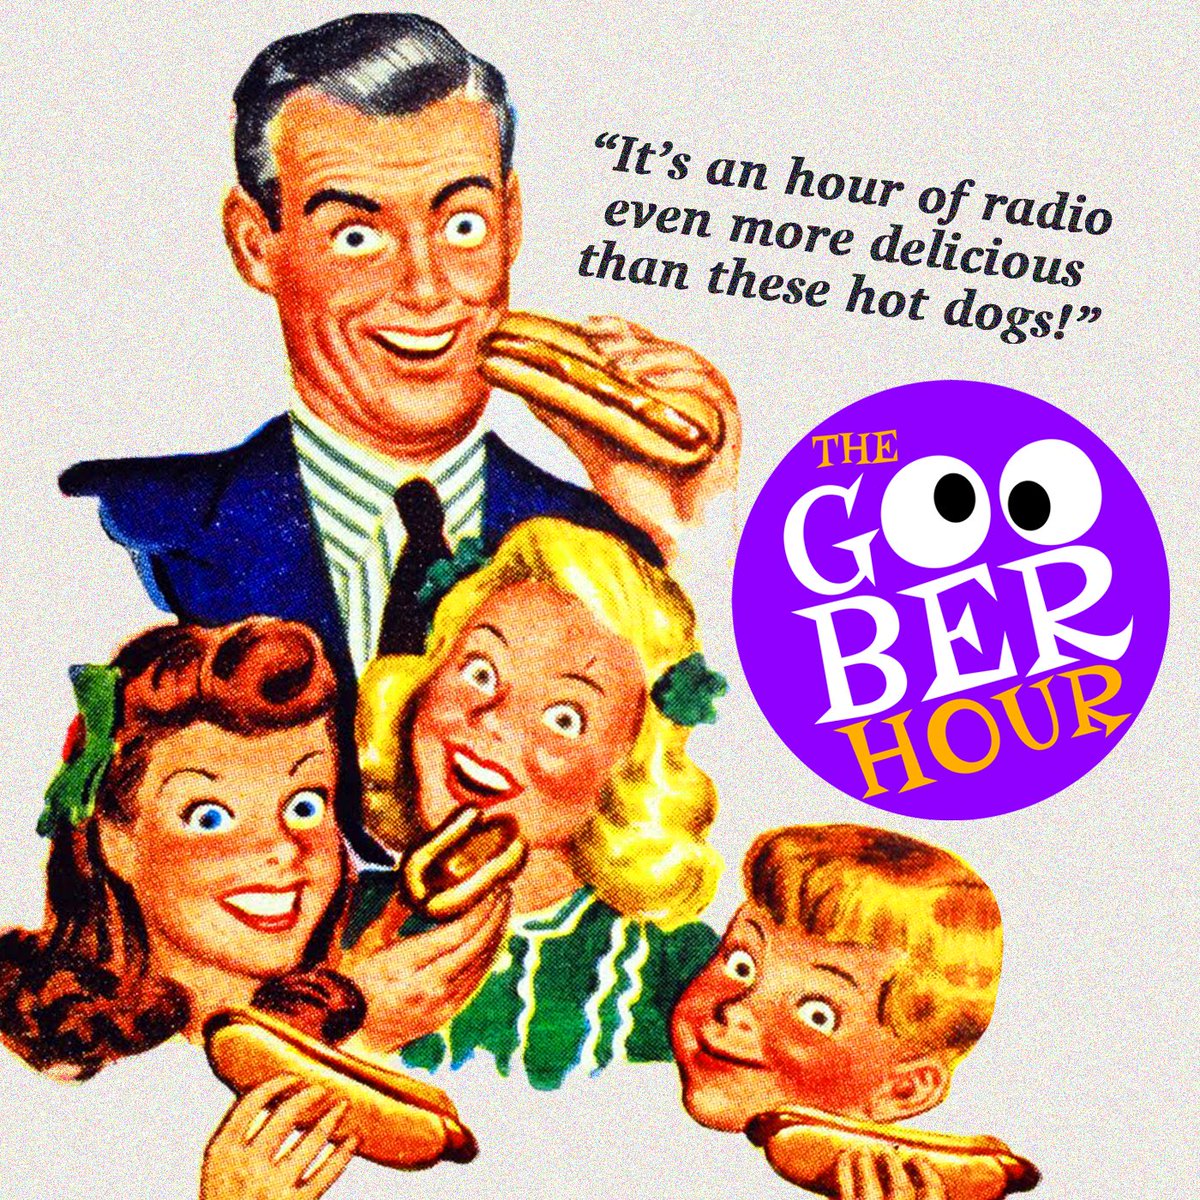 Today’s show is LIVE on TheGooberHour.com 🌭 We’ve got novelty records, on-air shenanigans and special guest @HarrisonHoude! With tunes by @LardDog, @TheRelativeMins, @normanfoote, @KnuckleheadzRap, @EllaFitzgerald, @PaulMcCartney & more.